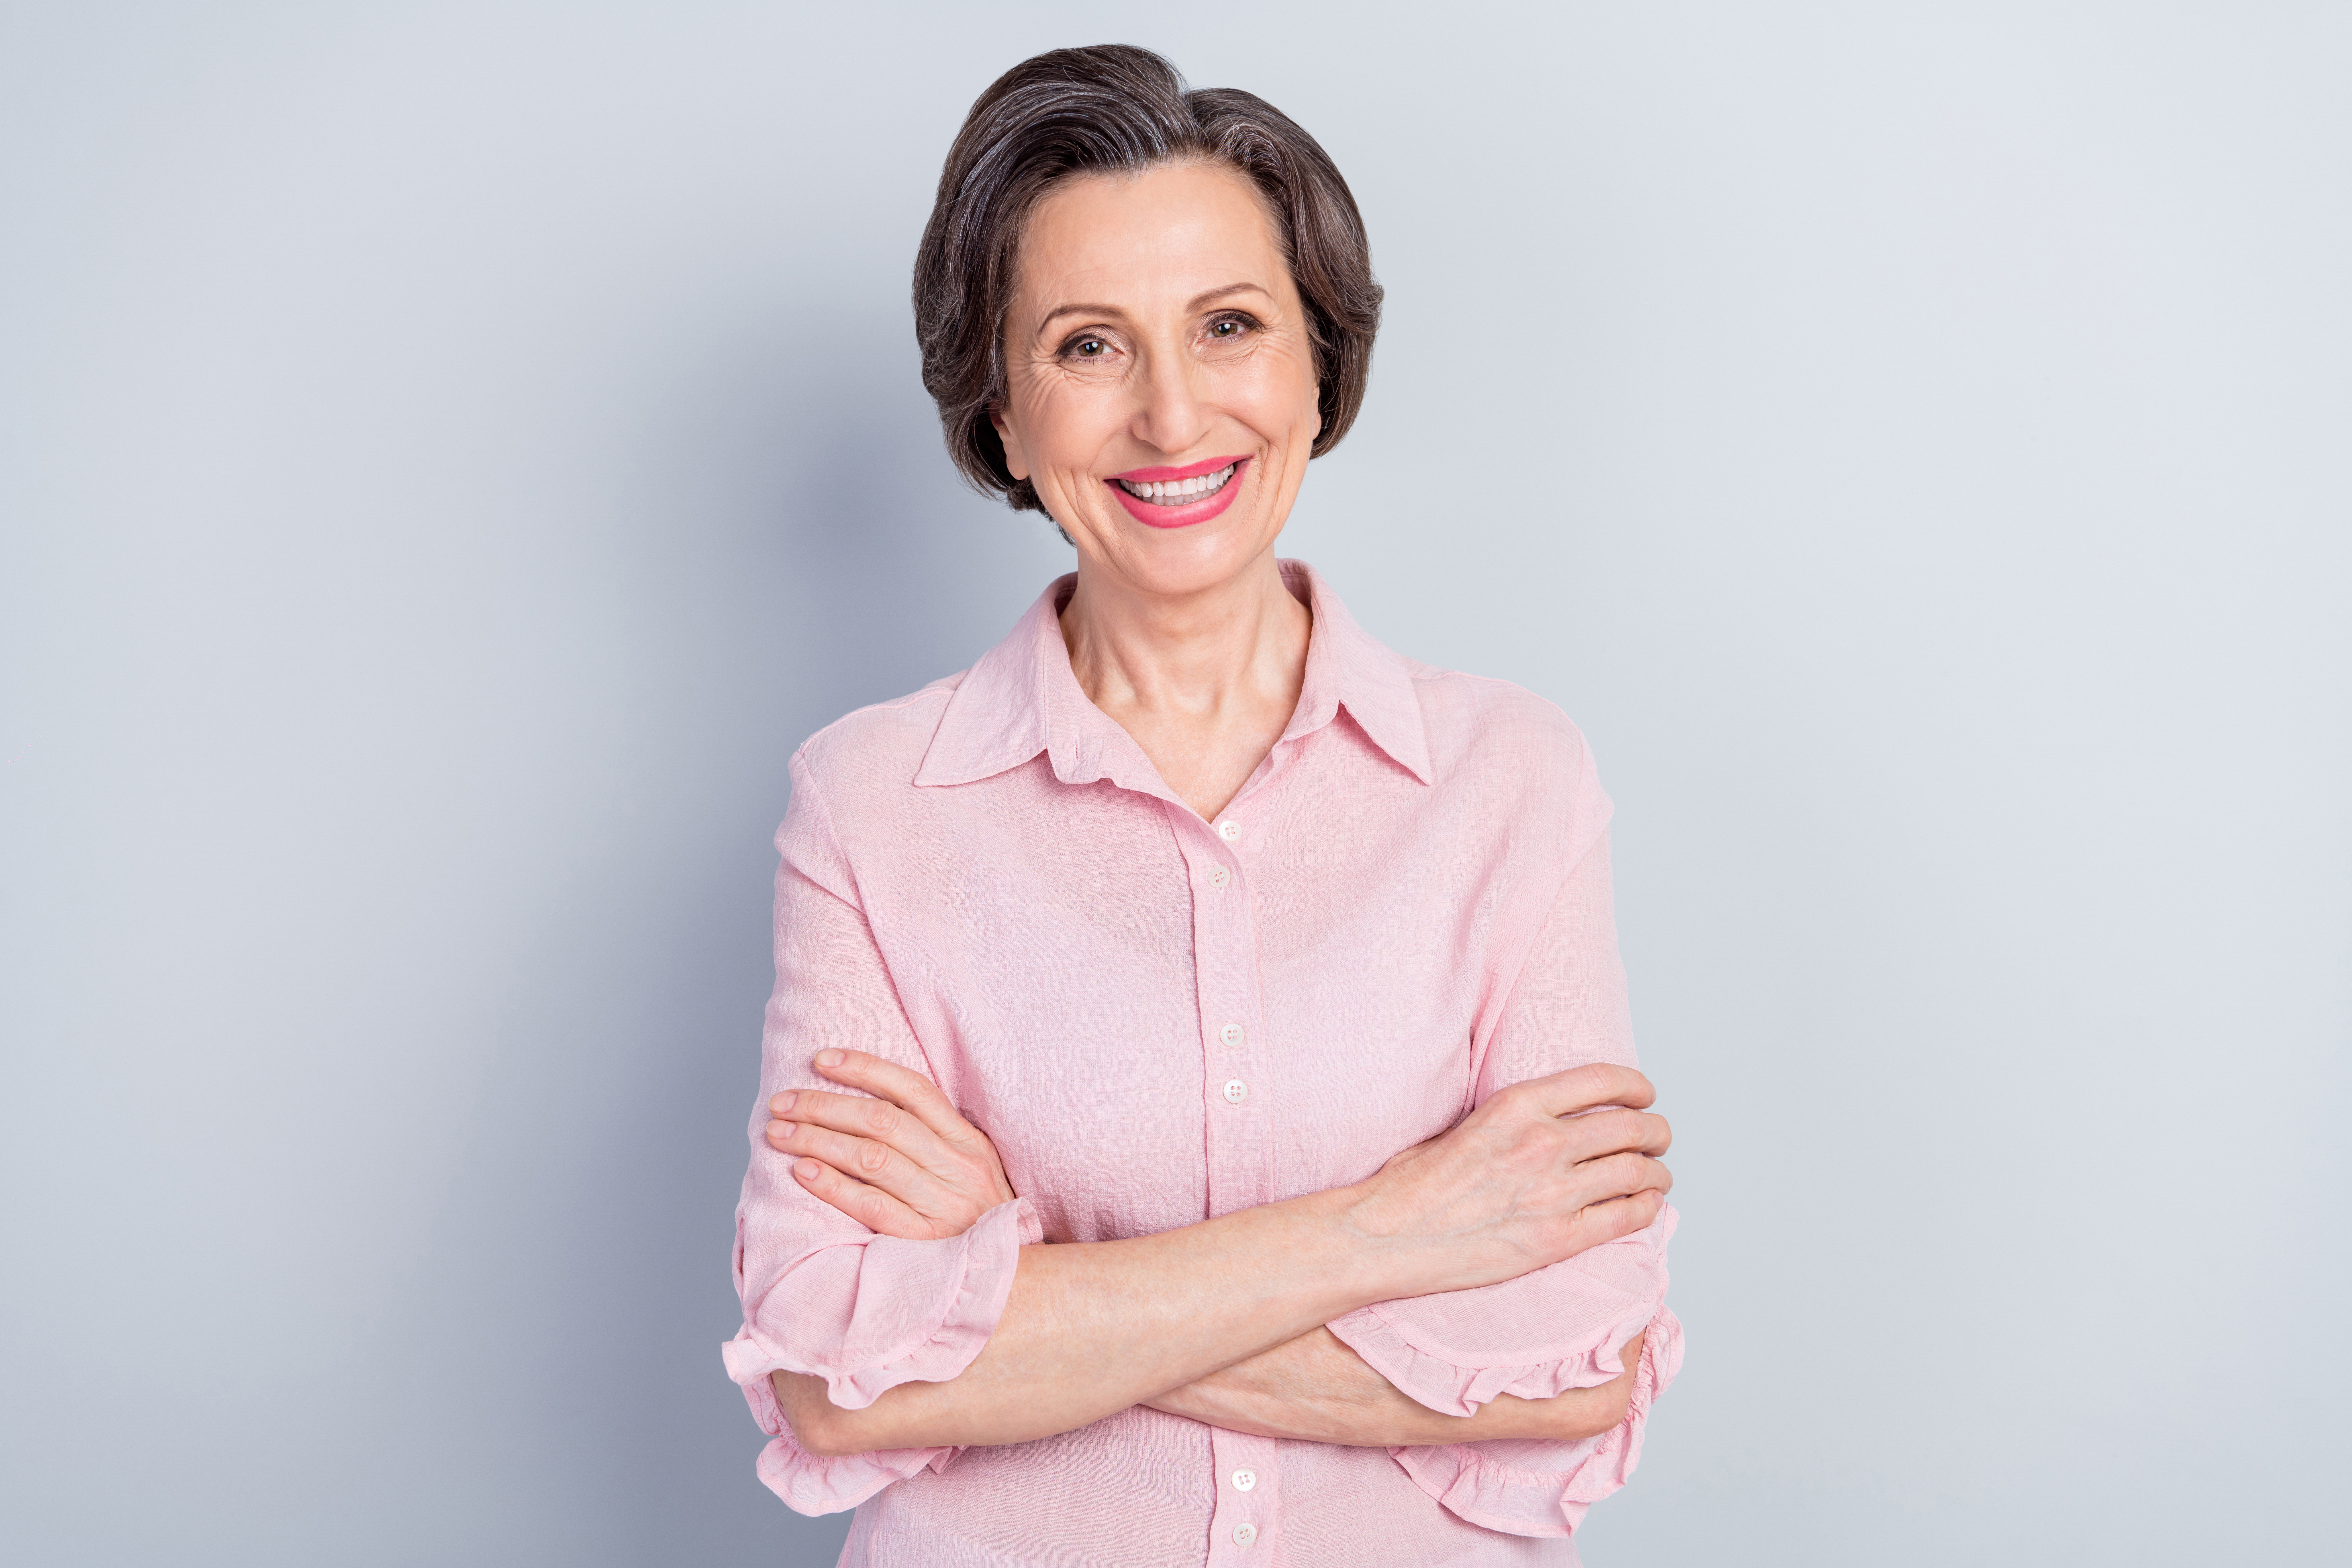 A mature woman standing with her arms crossed | Source: Shutterstock